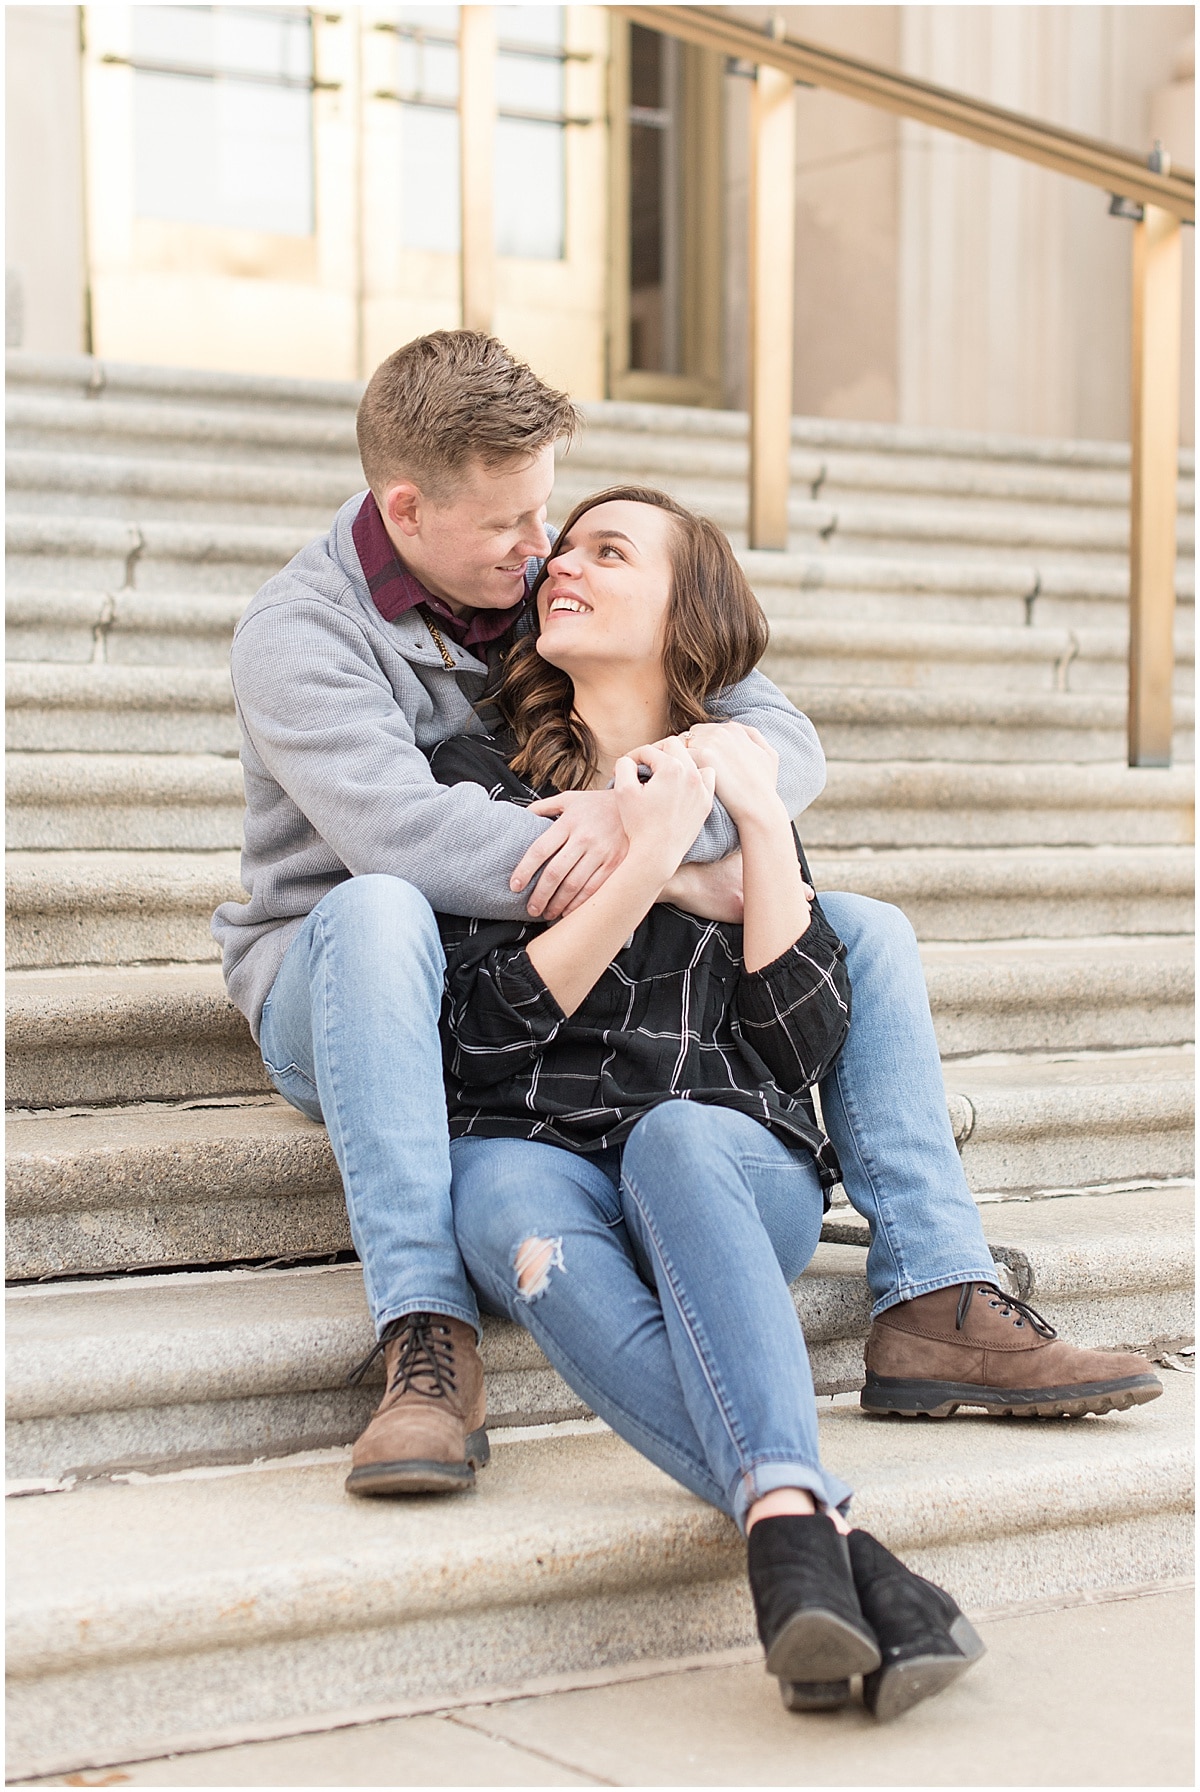 Winter Engagement Photos in Downtown Indianapolis 13.jpg